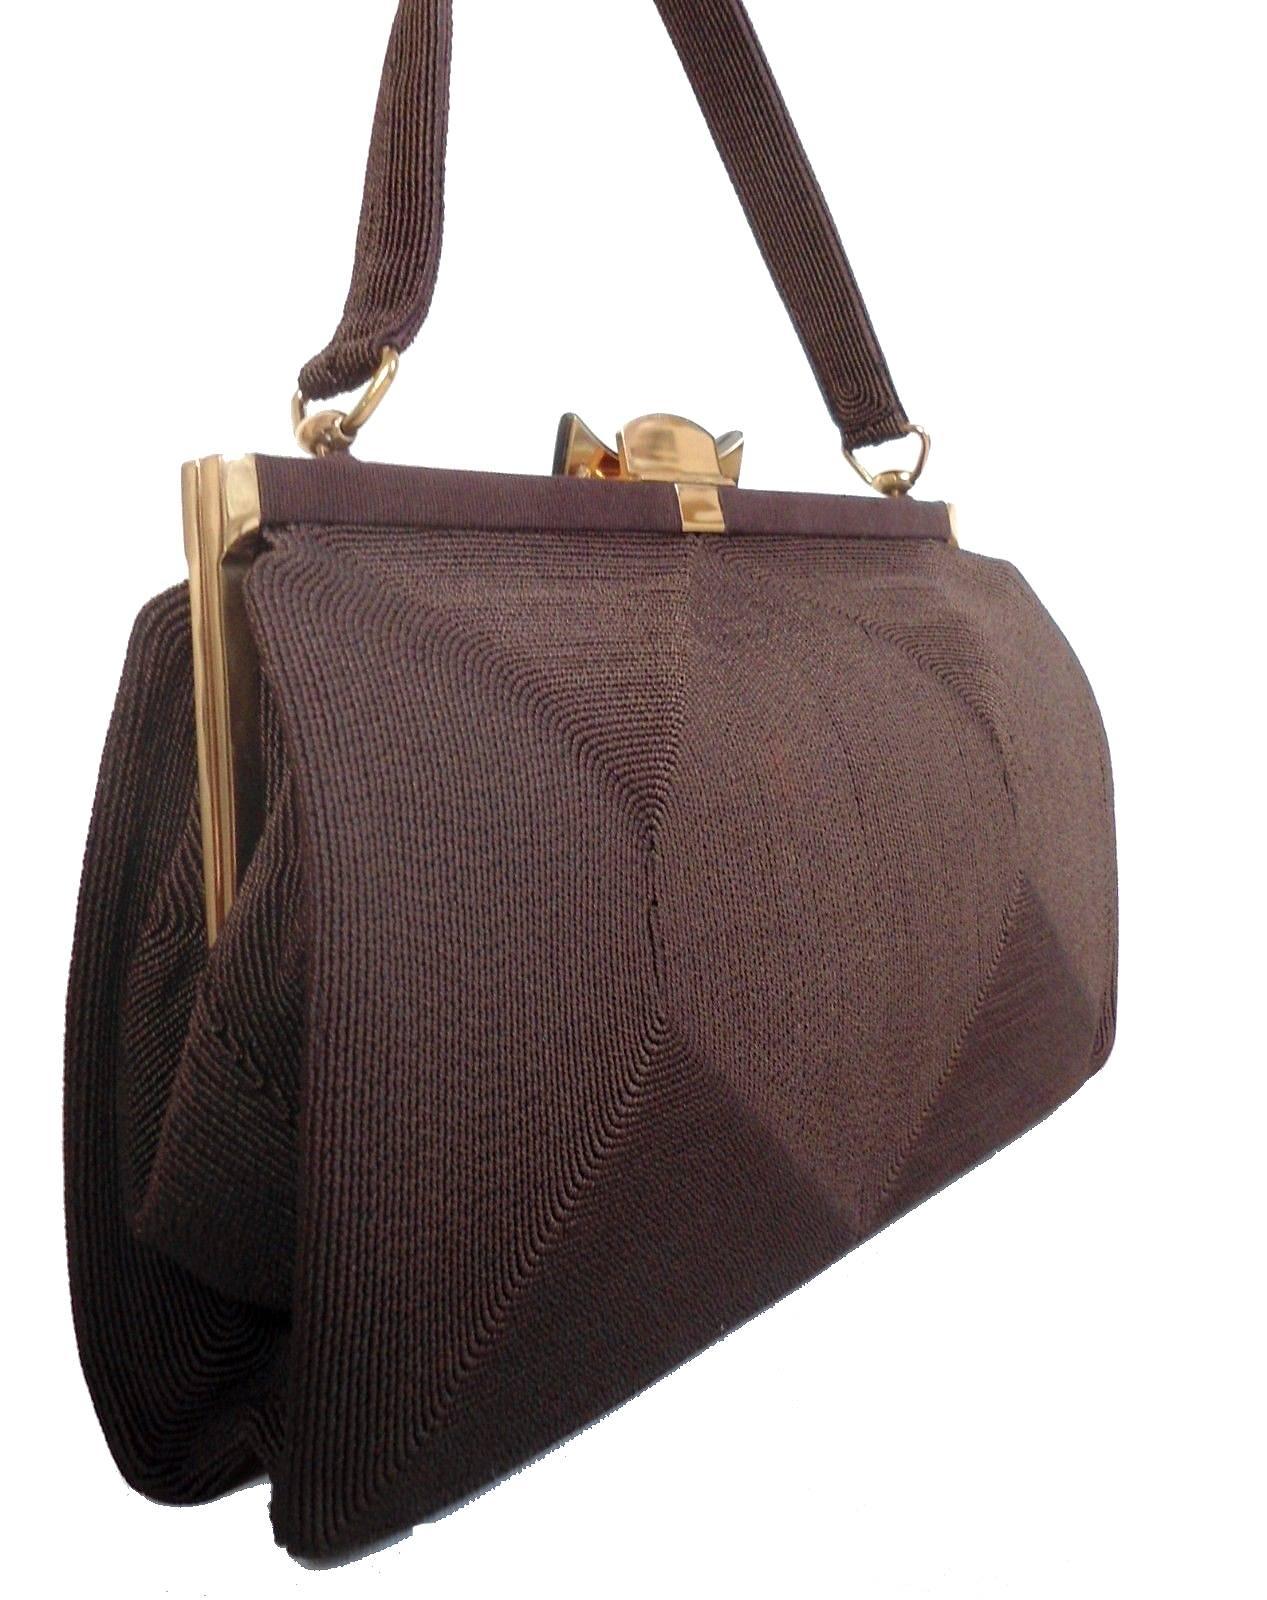 For your consideration is this wonderfully stylish English handbag made from cord with a Lucite and chrome clasp. This is a totally authentic bag in a wonderful Art Deco shape which dates to the late 1930s-1940s. The interior is lined in a plum silk